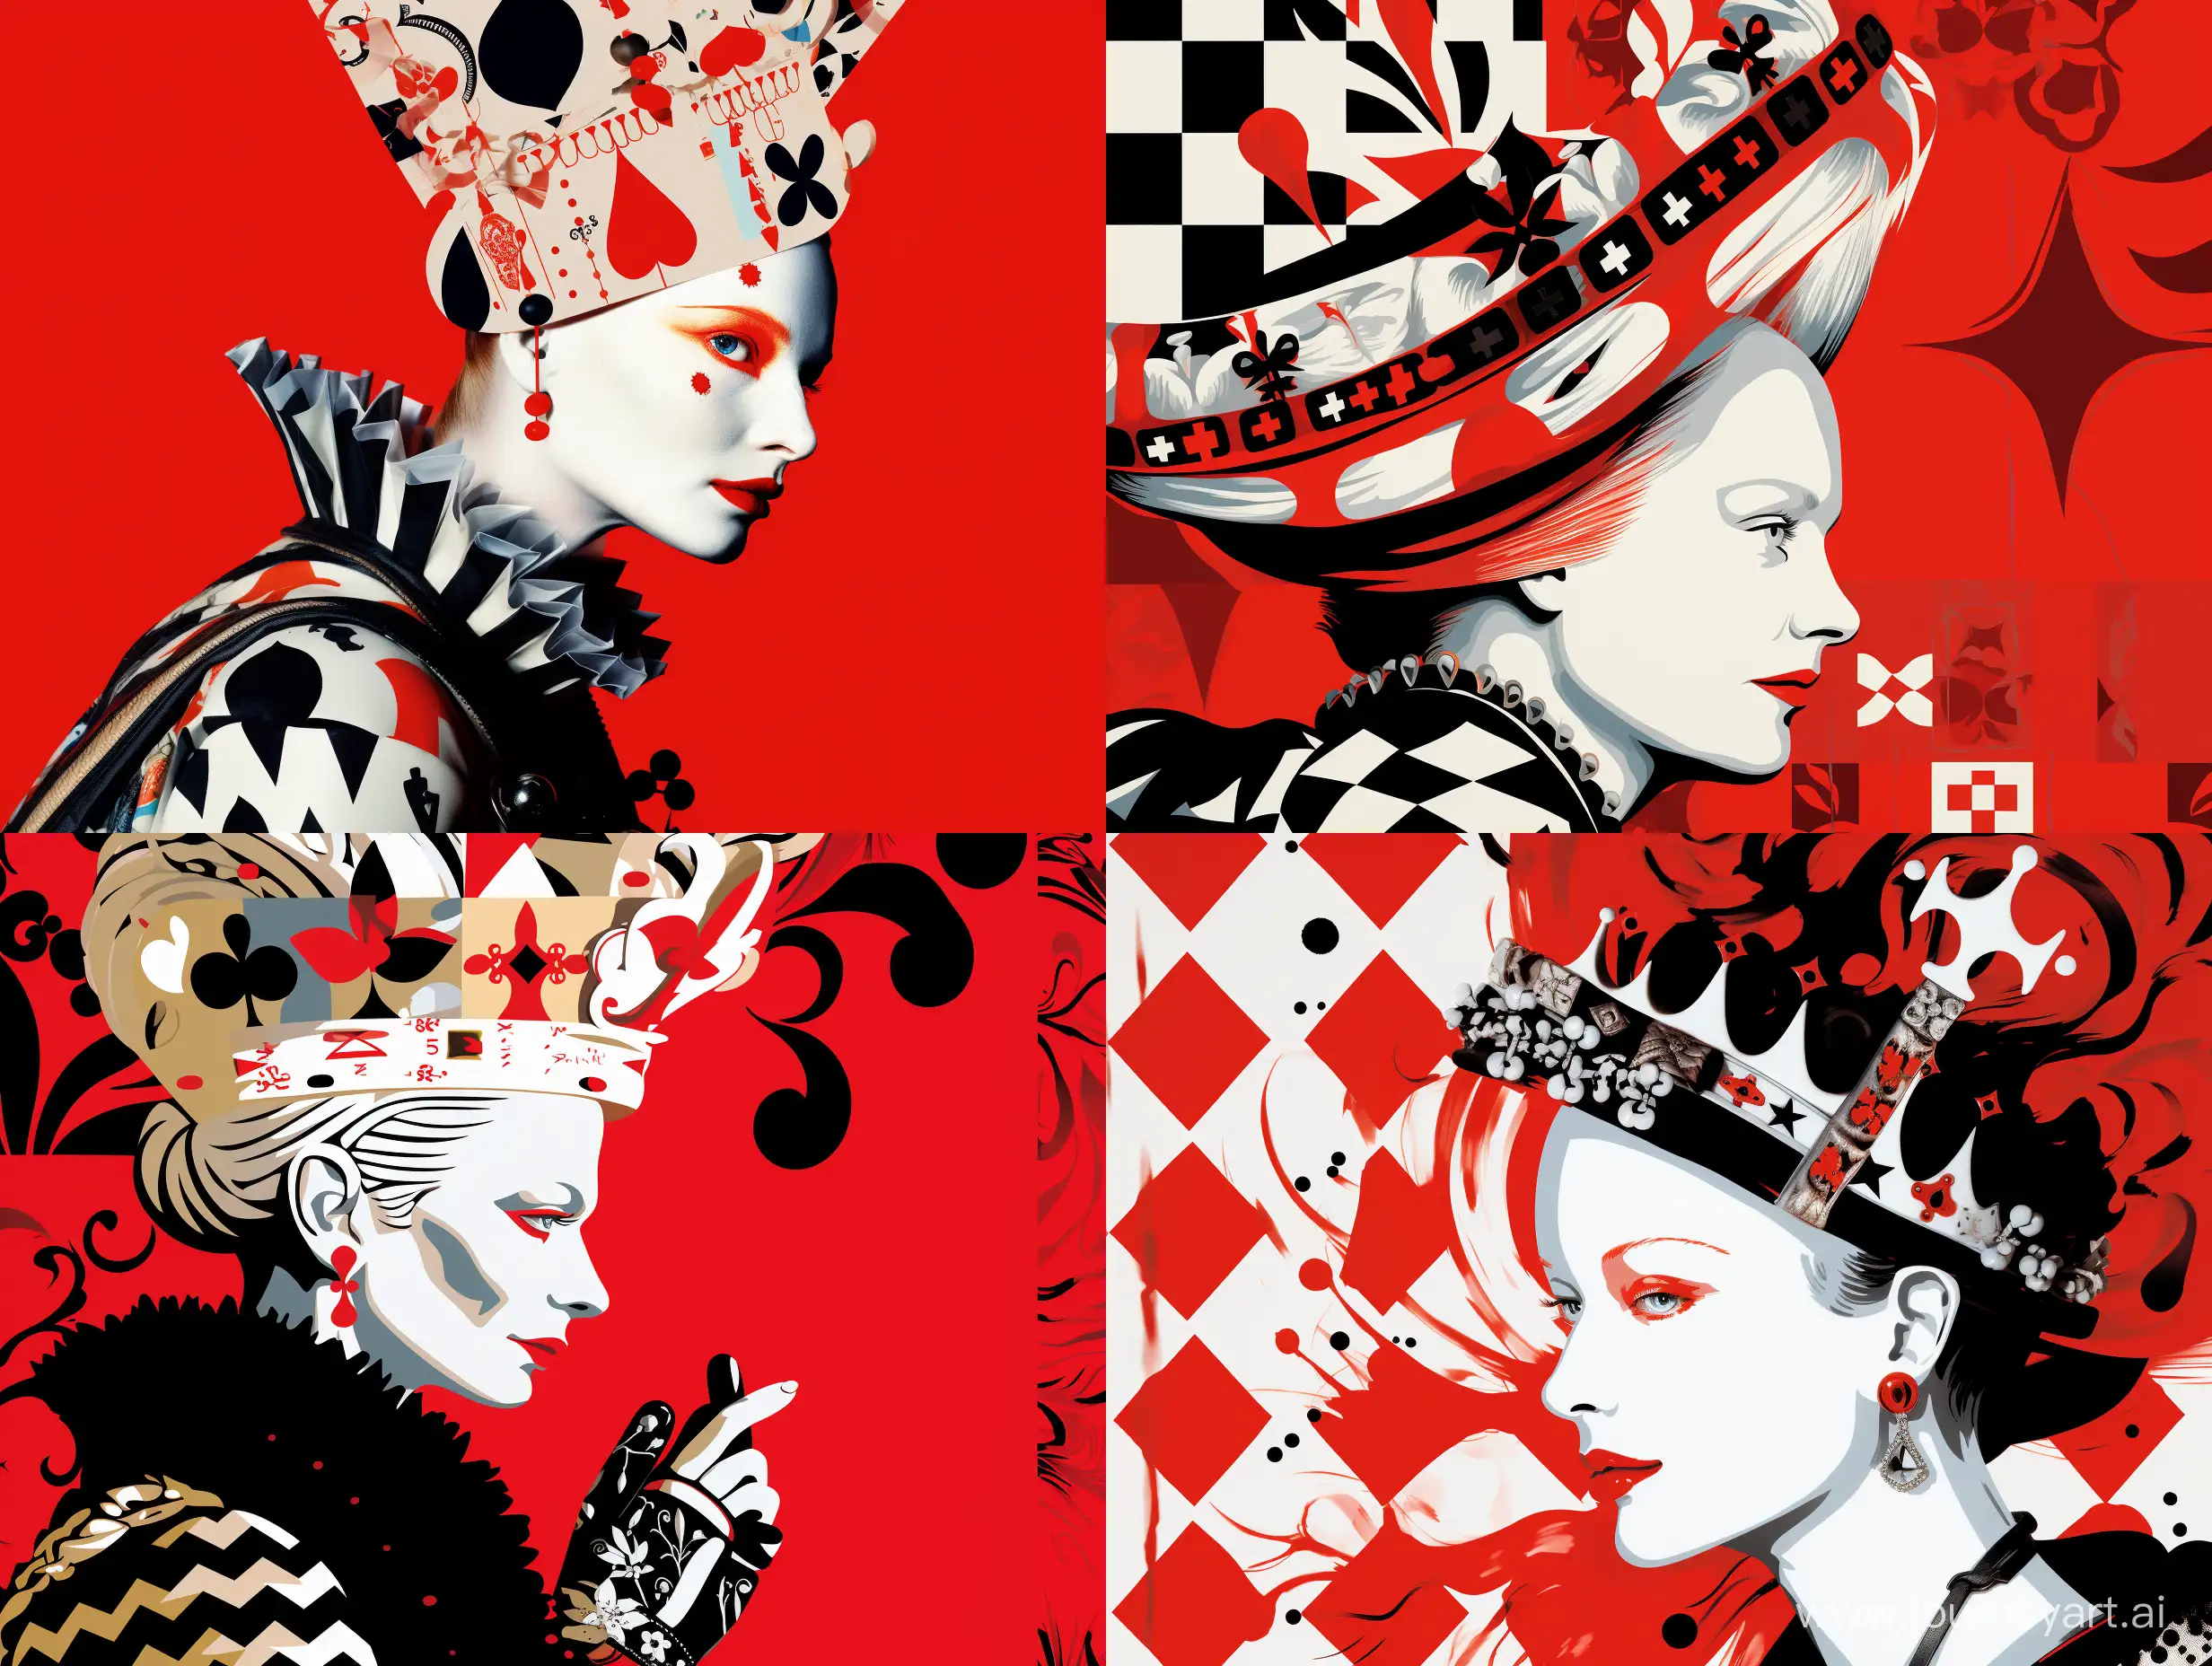 Waist-high portrait of Vivienne Westwood in profile, middle-aged, looking forward, with accessories from Vivienne Westwood, with a small crown on her head, many details, against the background of the pattern of the Vivienne Westwood logo, black, white, red, gray, white on the edge, fashion illustration style, pop art style